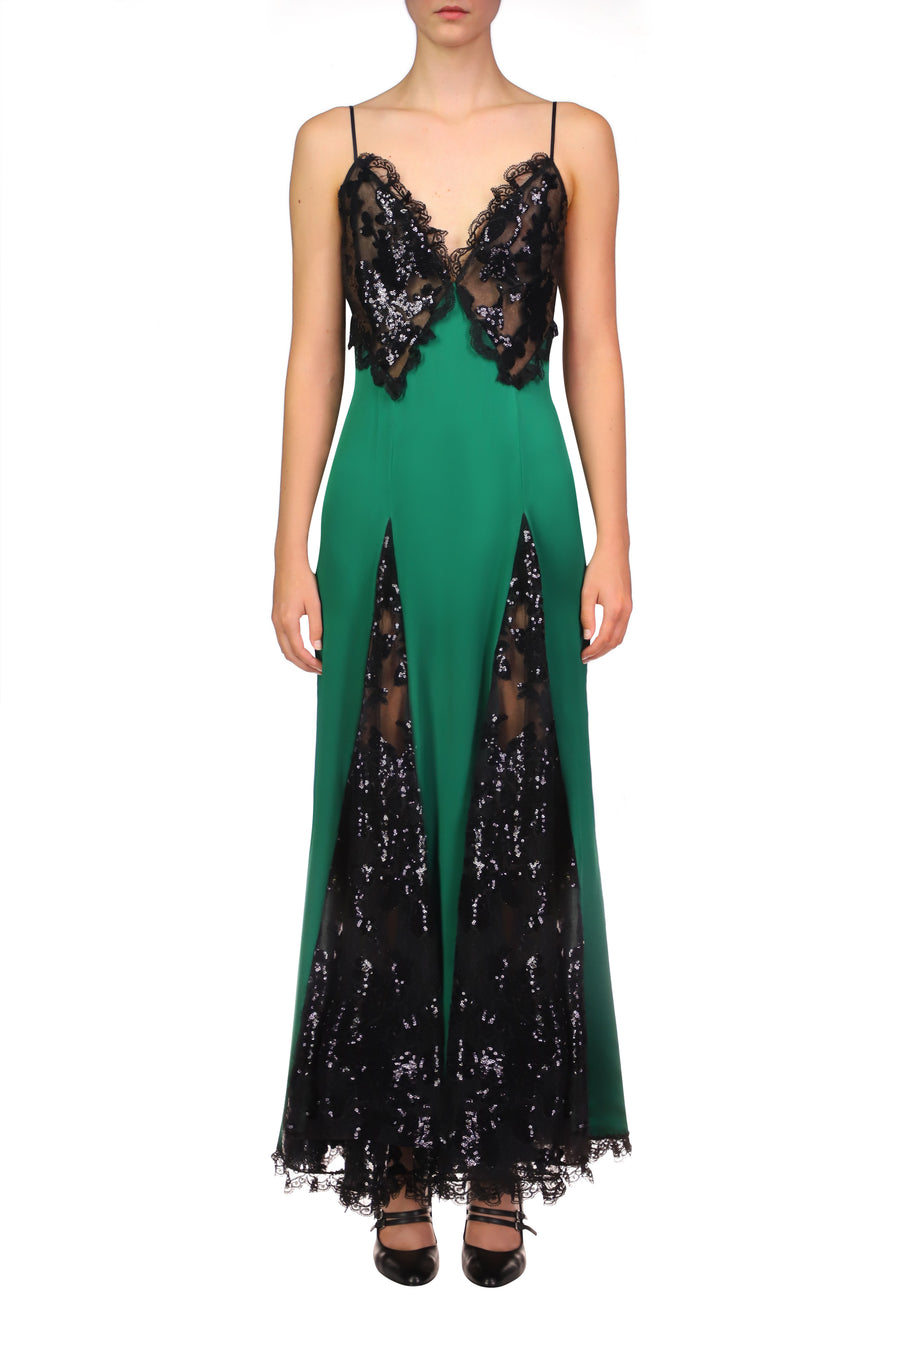 Green Silk Satin And Black Sequin Dress With Godet And Lace Ruffle